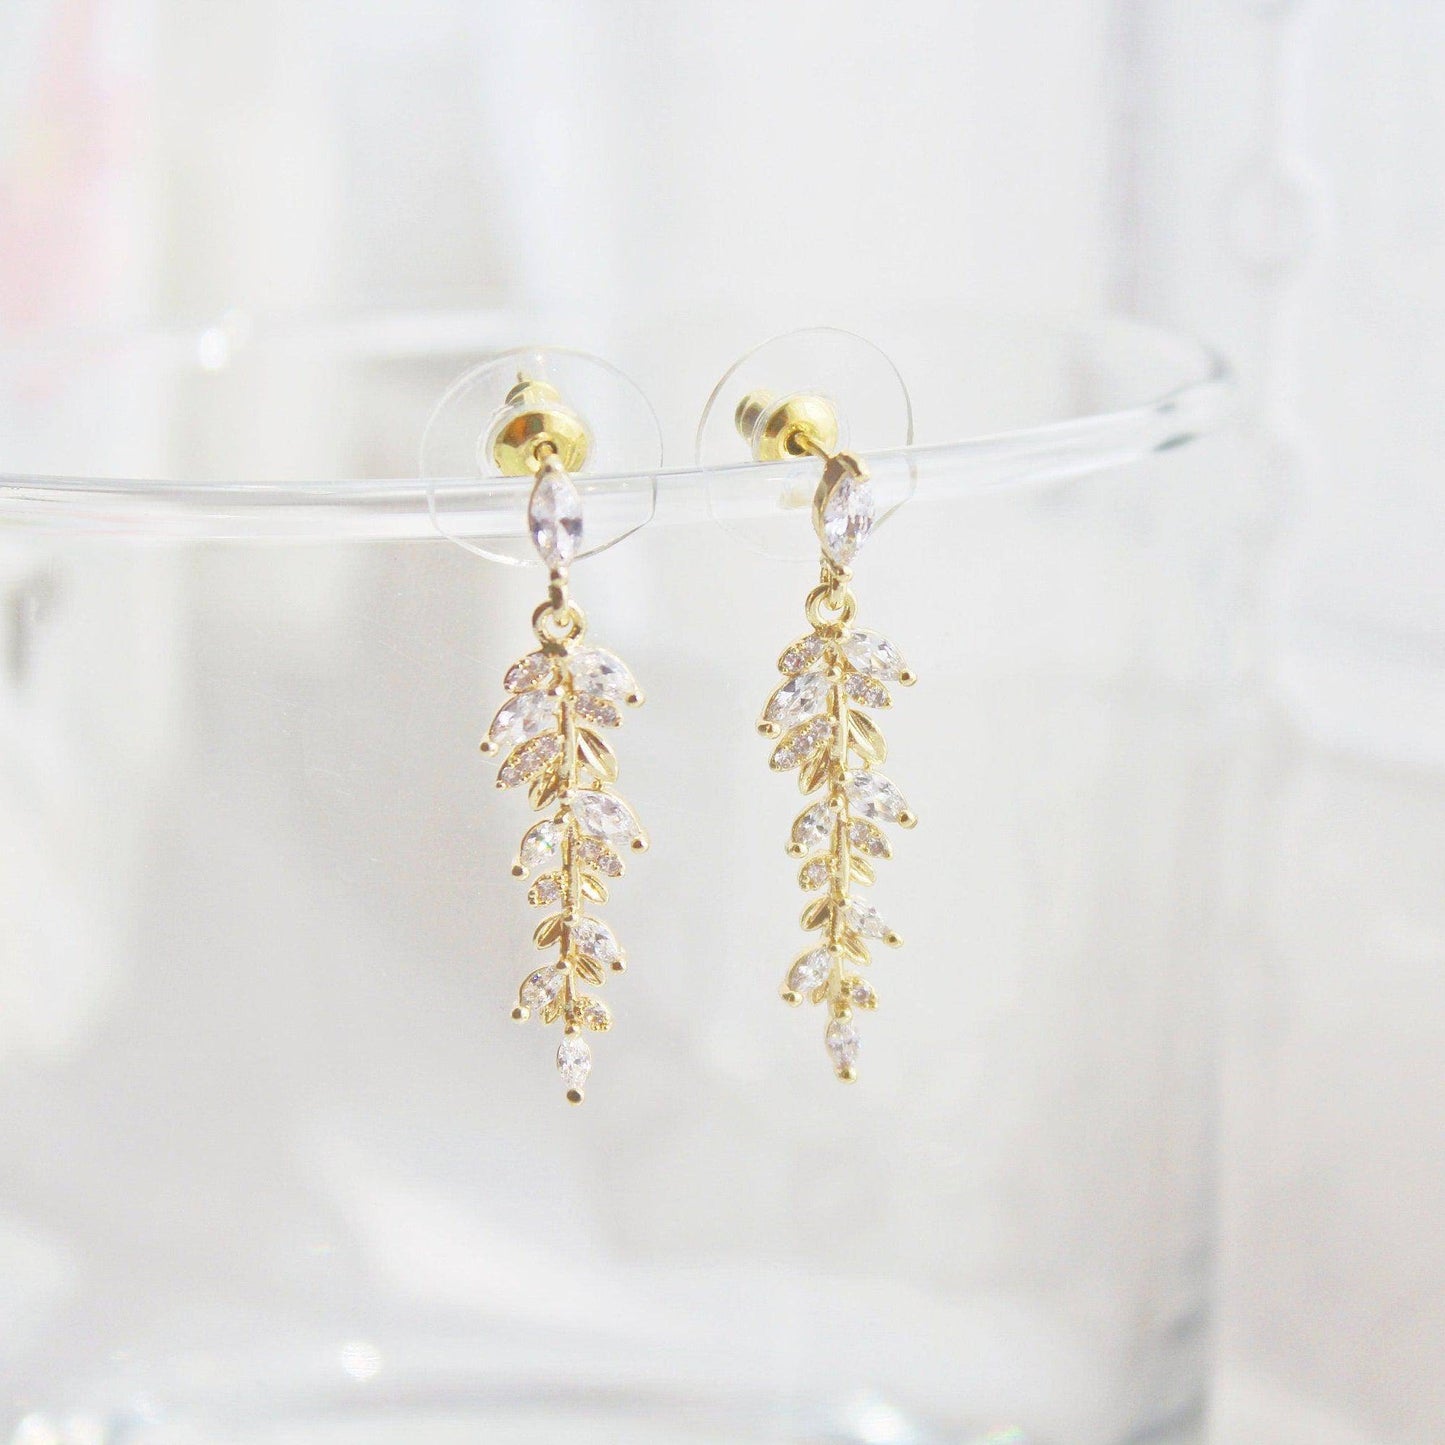 Willow Earrings - Gold and Crystal Leaf Dangle Drop Earrings-Ninaouity